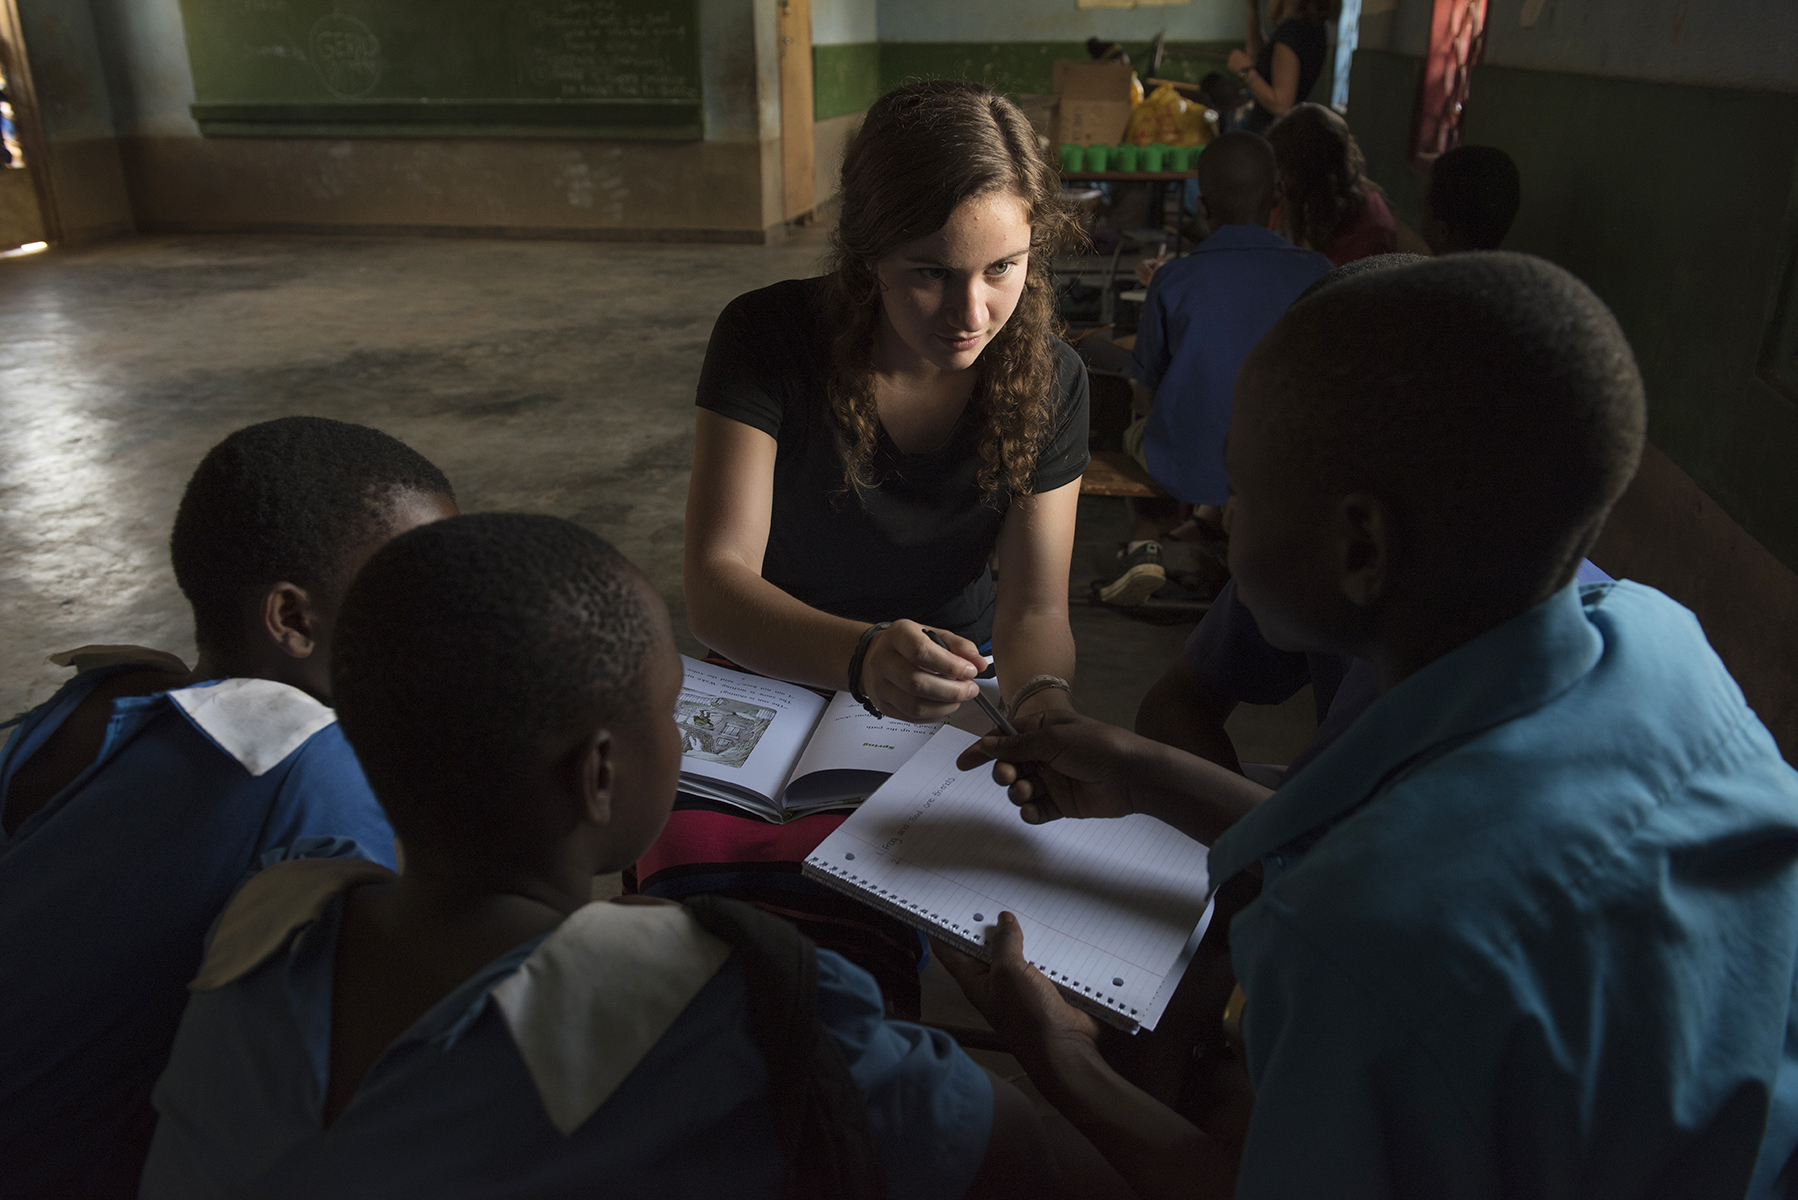 Although these Malawian children have English skills, their reading comprehension skills are low. The American students brought books and writing materials from the U.S. for the English lessons. 